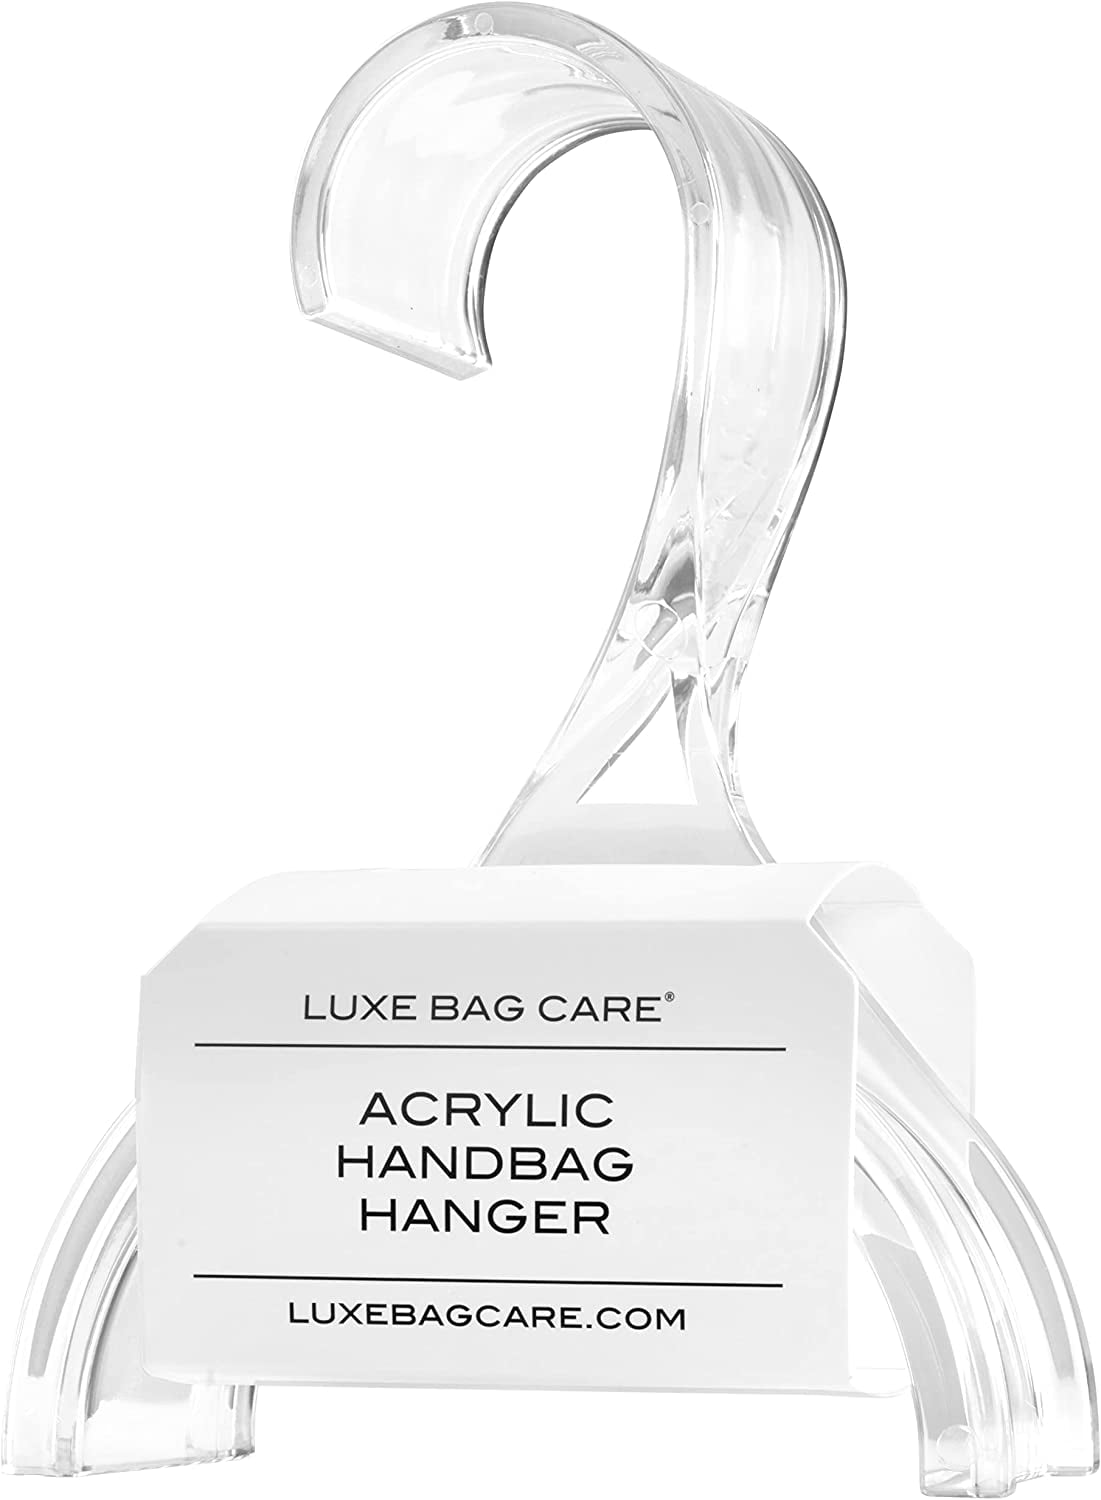 Luxe Bag Care Luxury Purse Closet Acrylic Hanger - Protect, Organize, Display - Saves Integrity of Purse Handles - Acrylic Hanger for Closet - Luxury